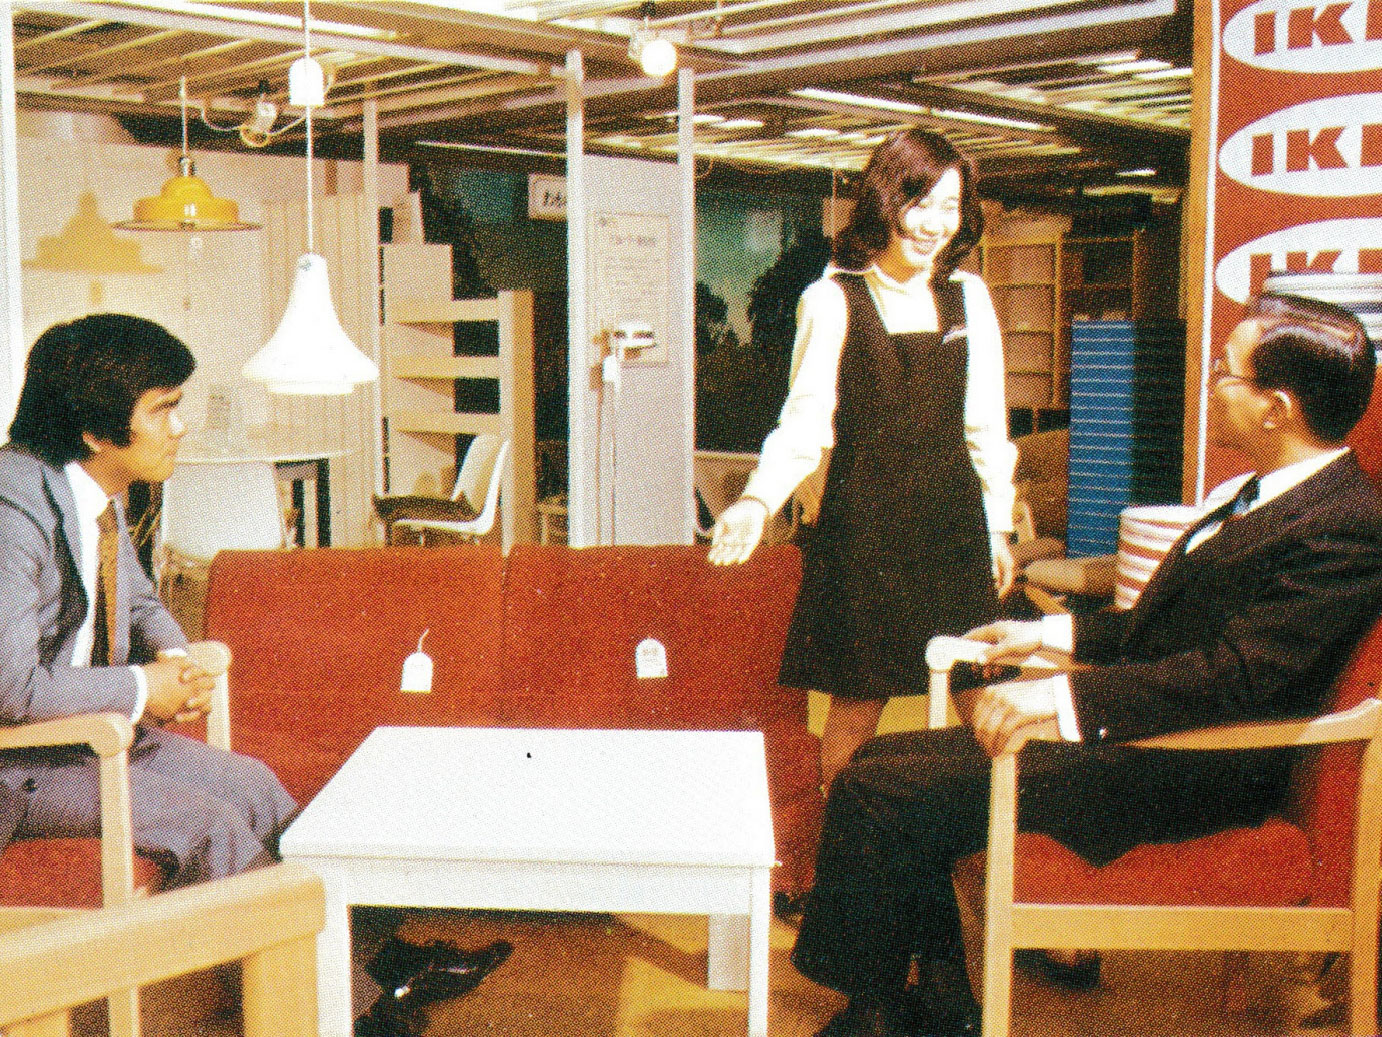 A female shop assistant with two men in suits, seated in armchairs, IKEA furniture in a 1970s Japanese department store.